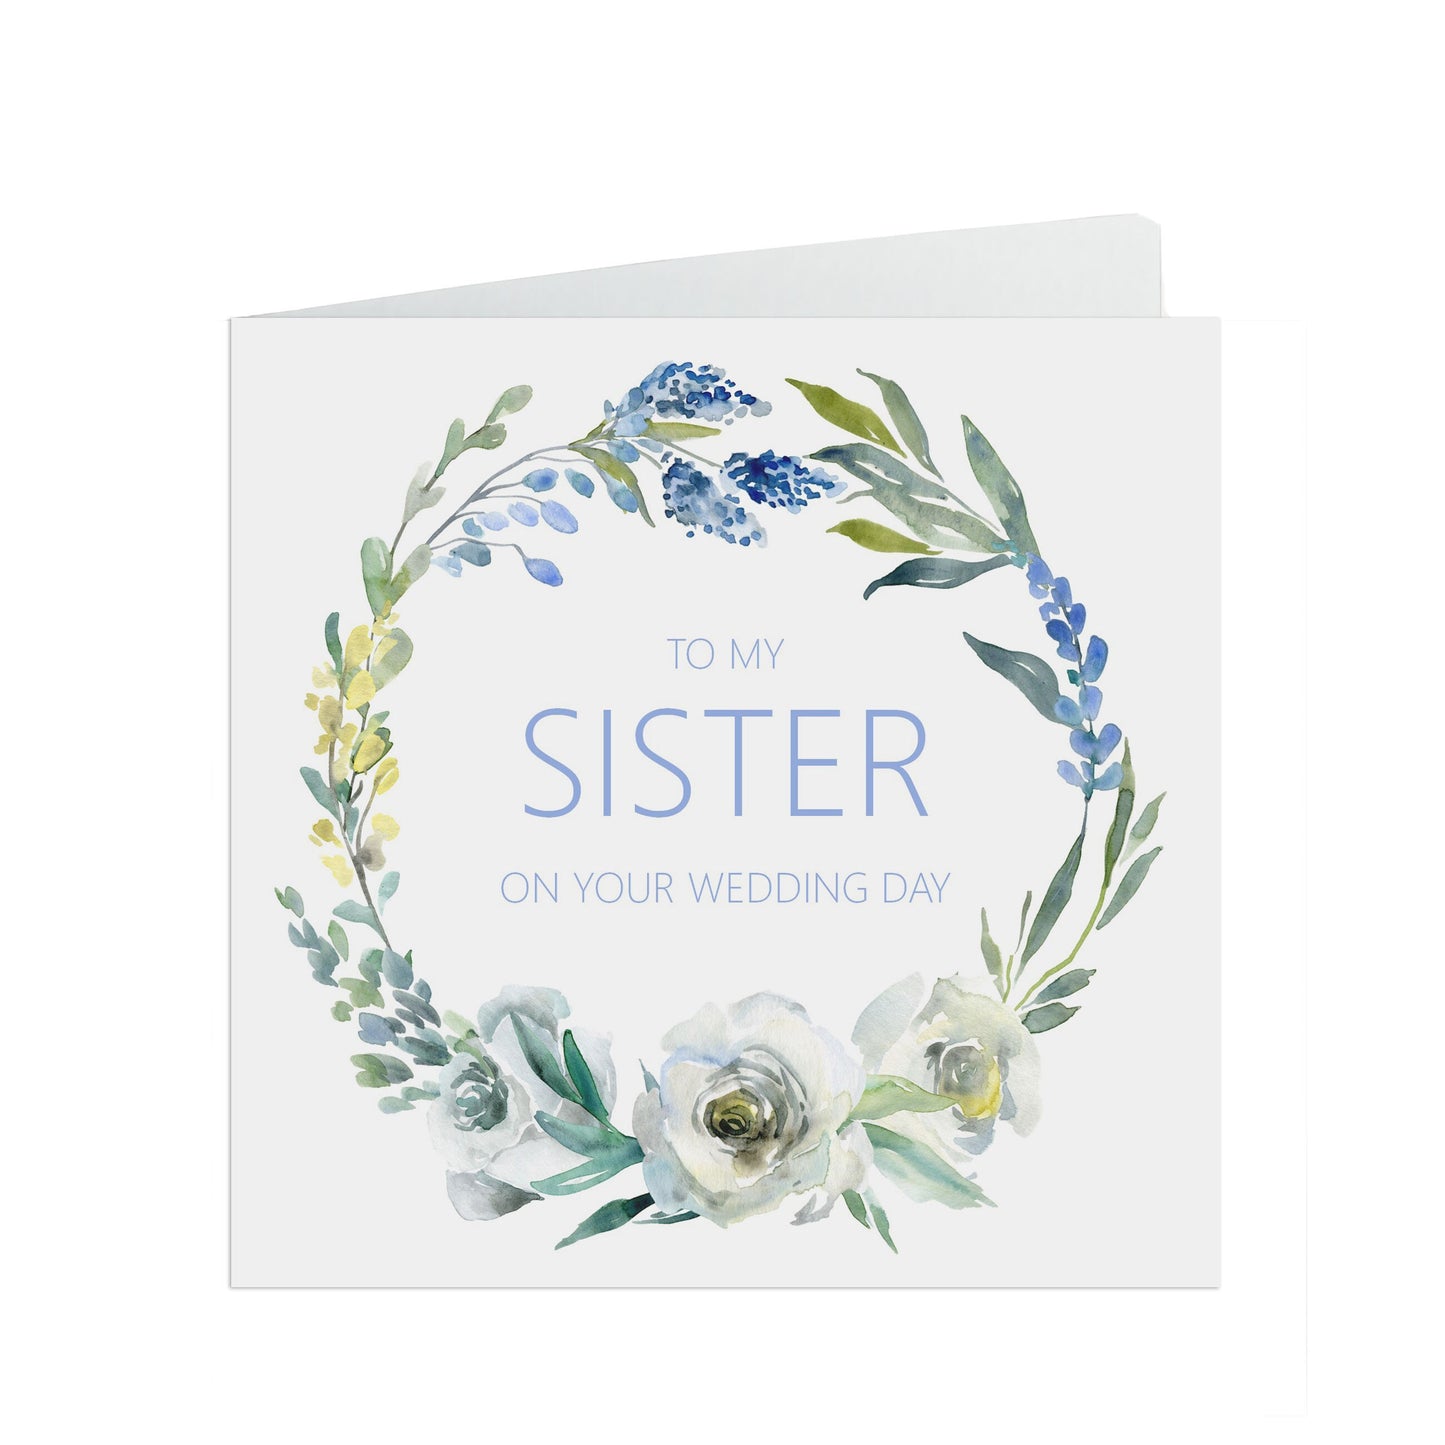 Sister Wedding Day Card - Blue Floral